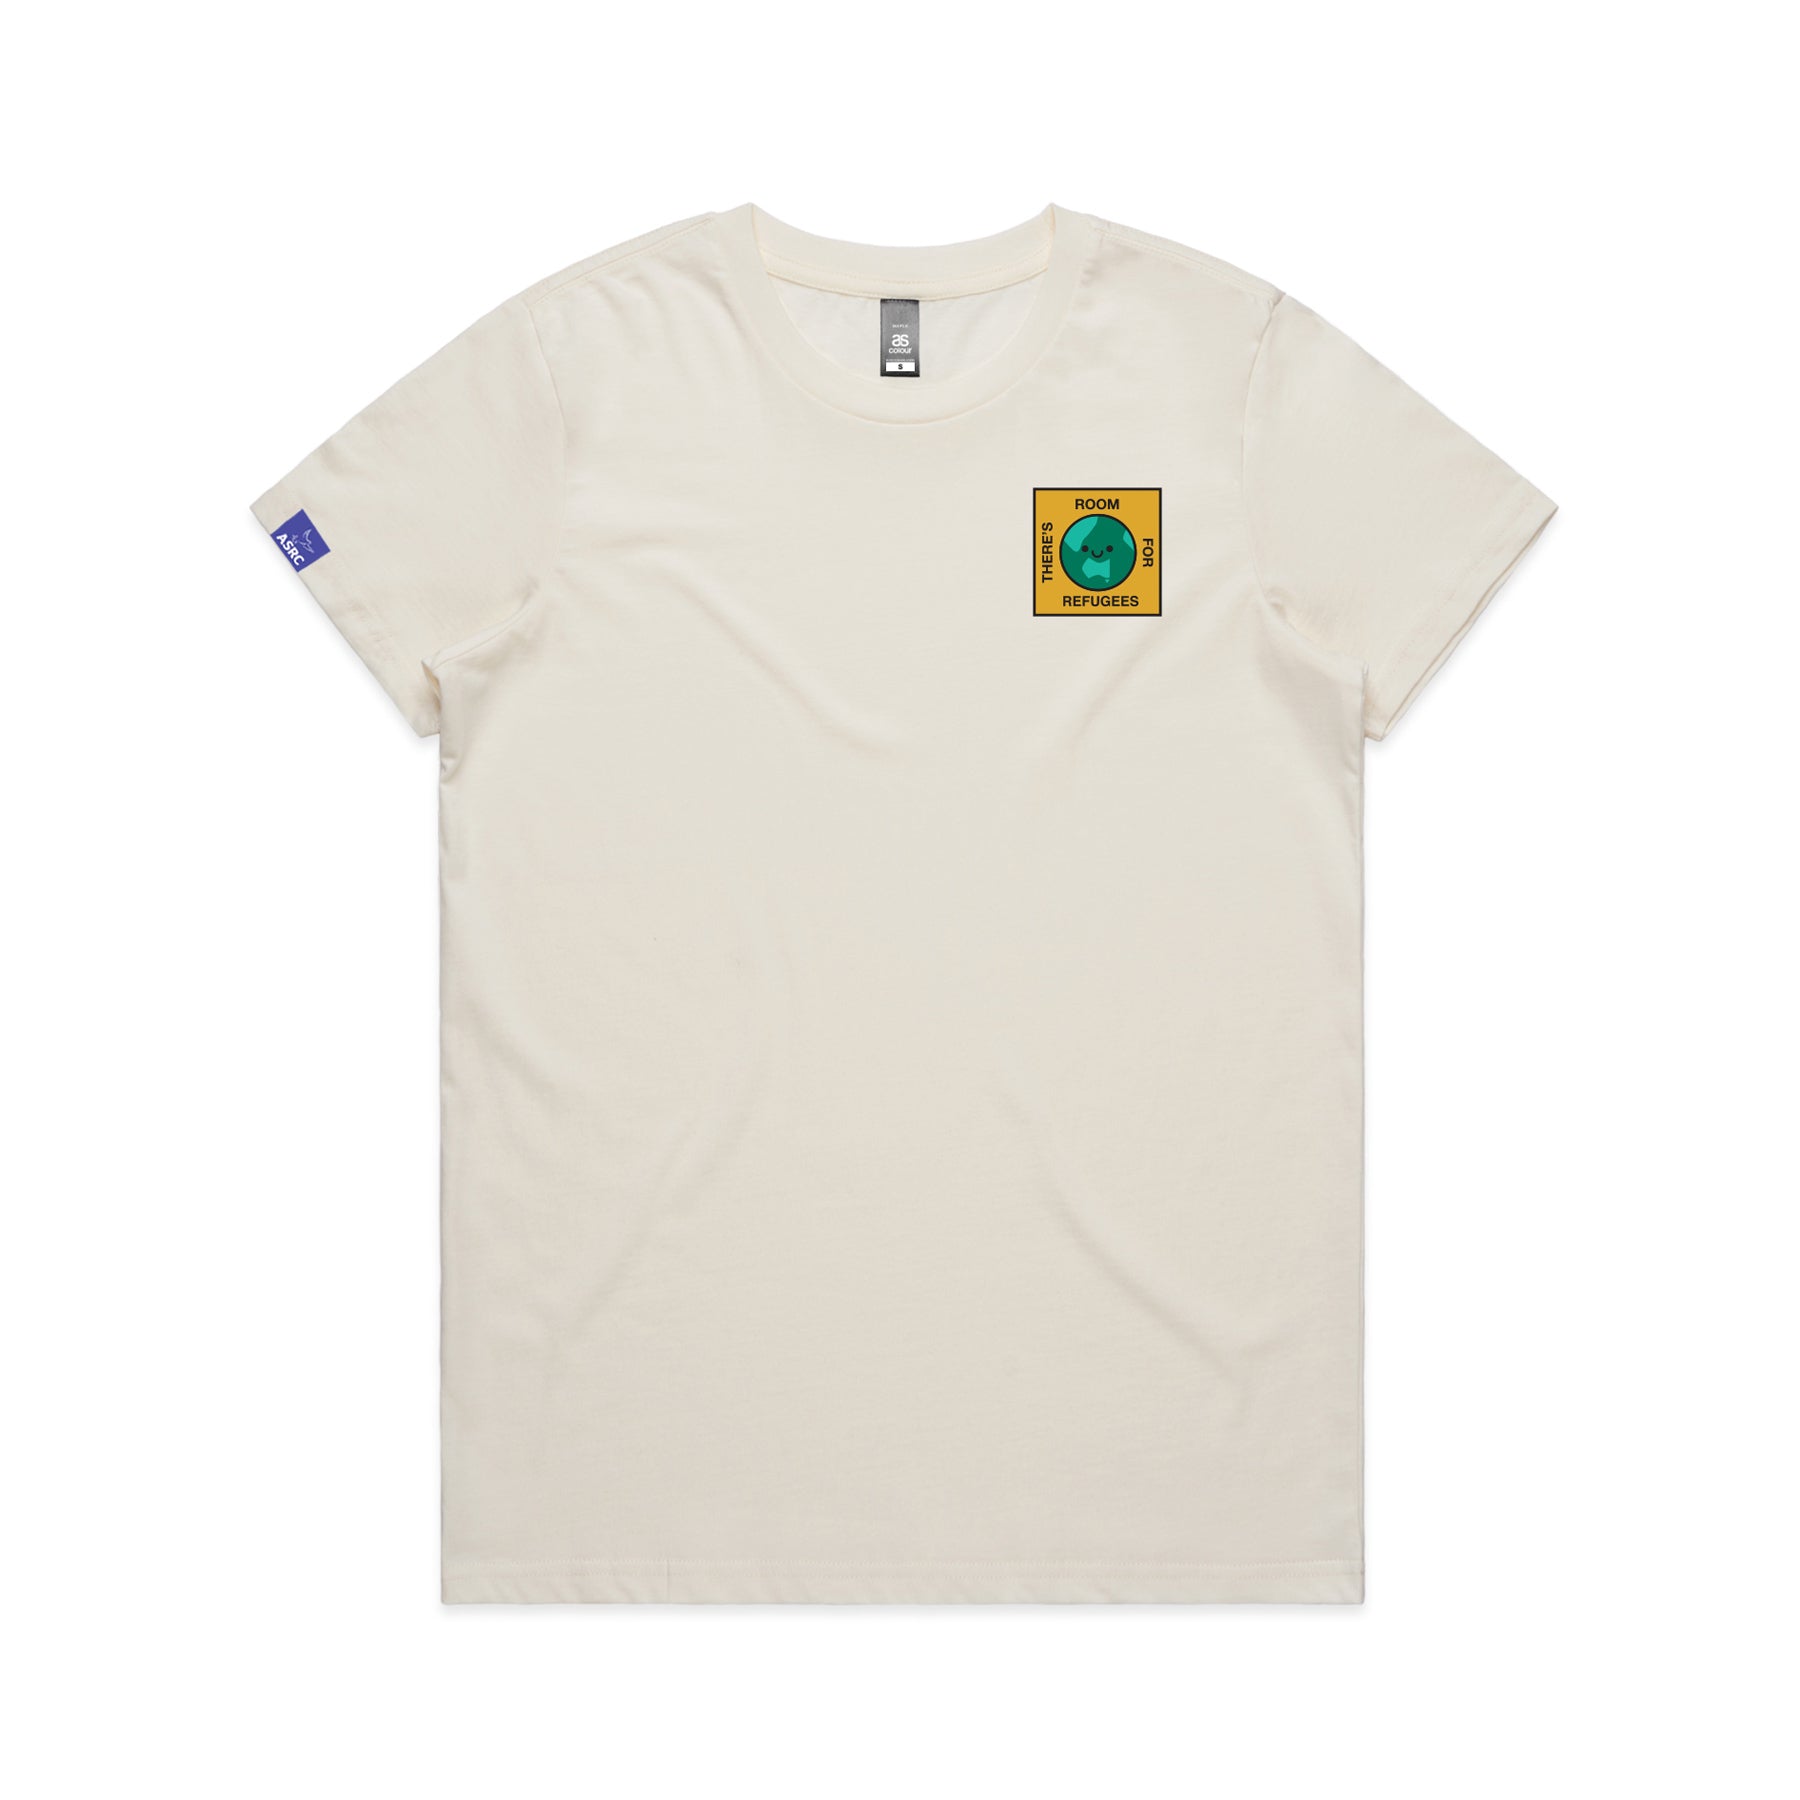 Beci Orpin x ASRC Welcome T-shirt - Womens (Natural)